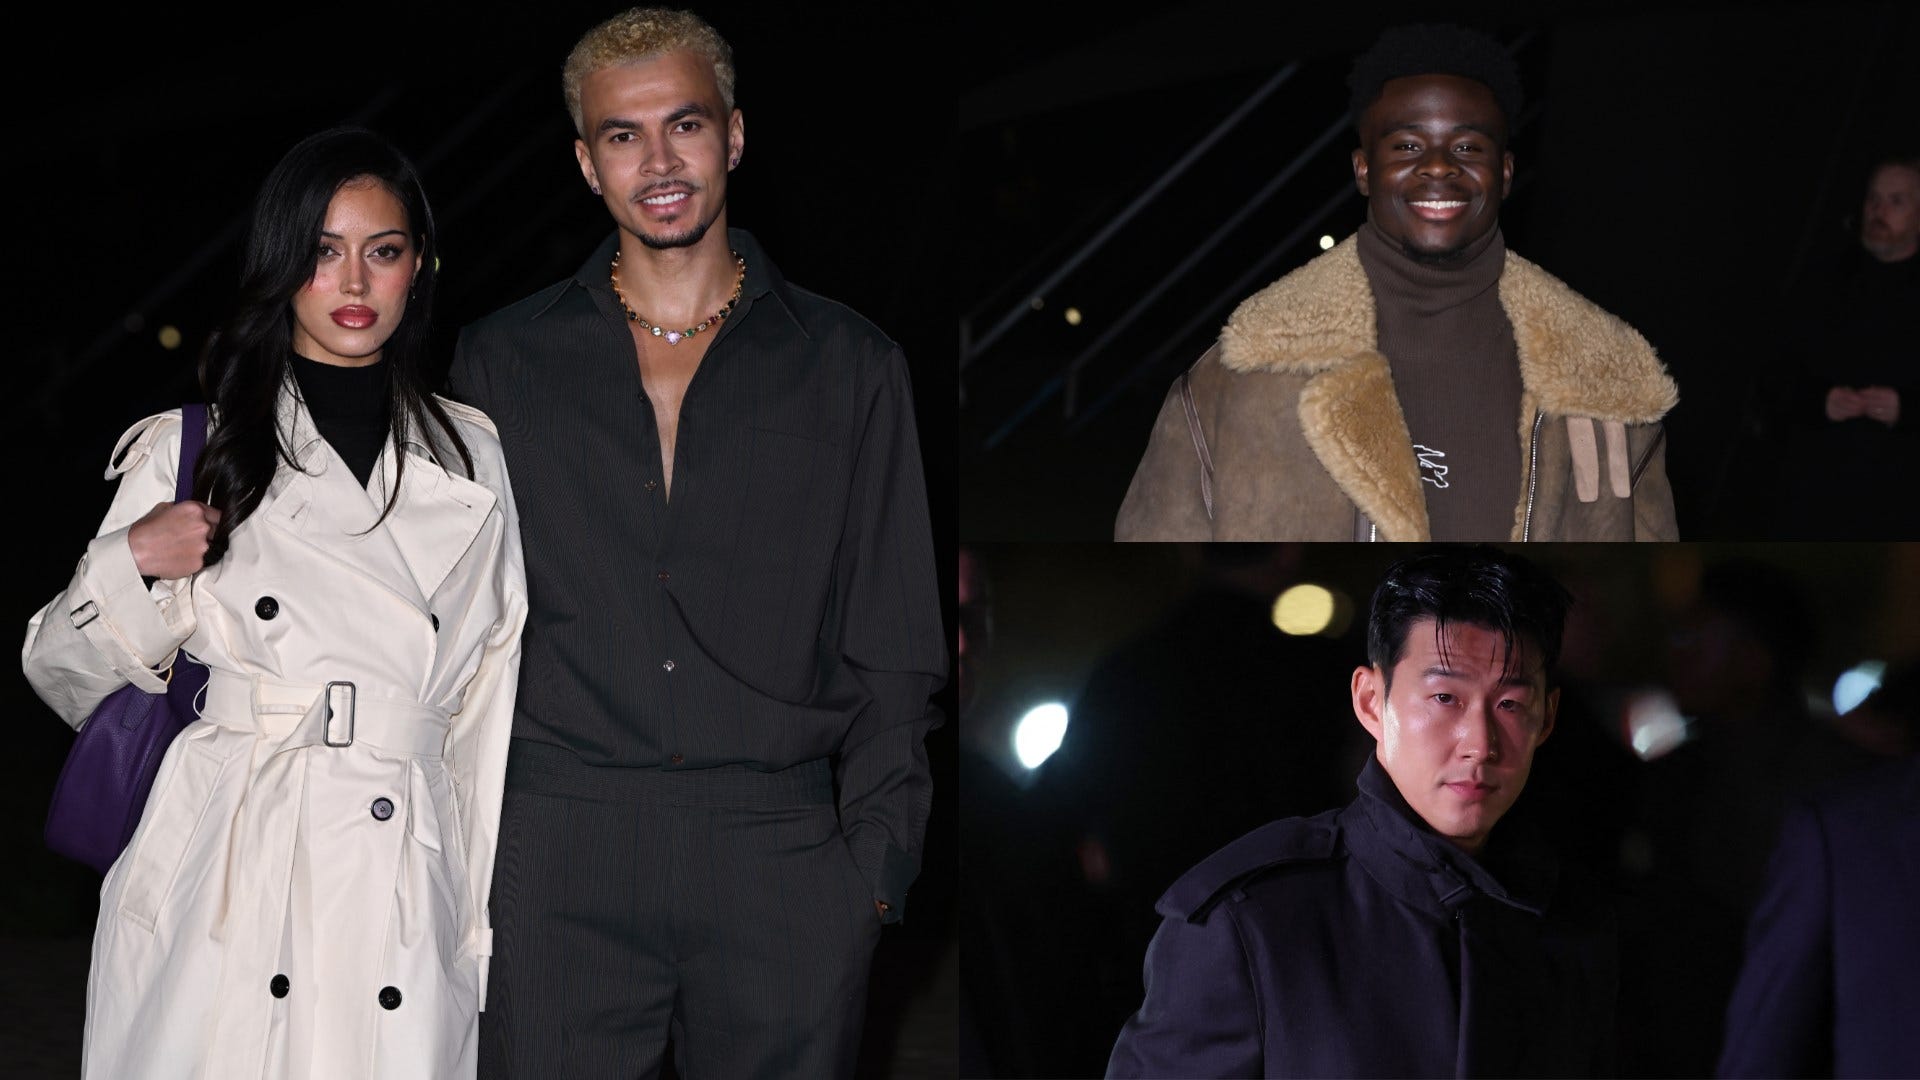 Dele Alli ignores Everton's crucial clash with Crystal Palace to attend London Fashion Week alongside girlfriend Cindy Kimberly - as Bukayo Saka and Son Heung-min also make Burberry Show after pausing Arsenal-Tottenham rivalry